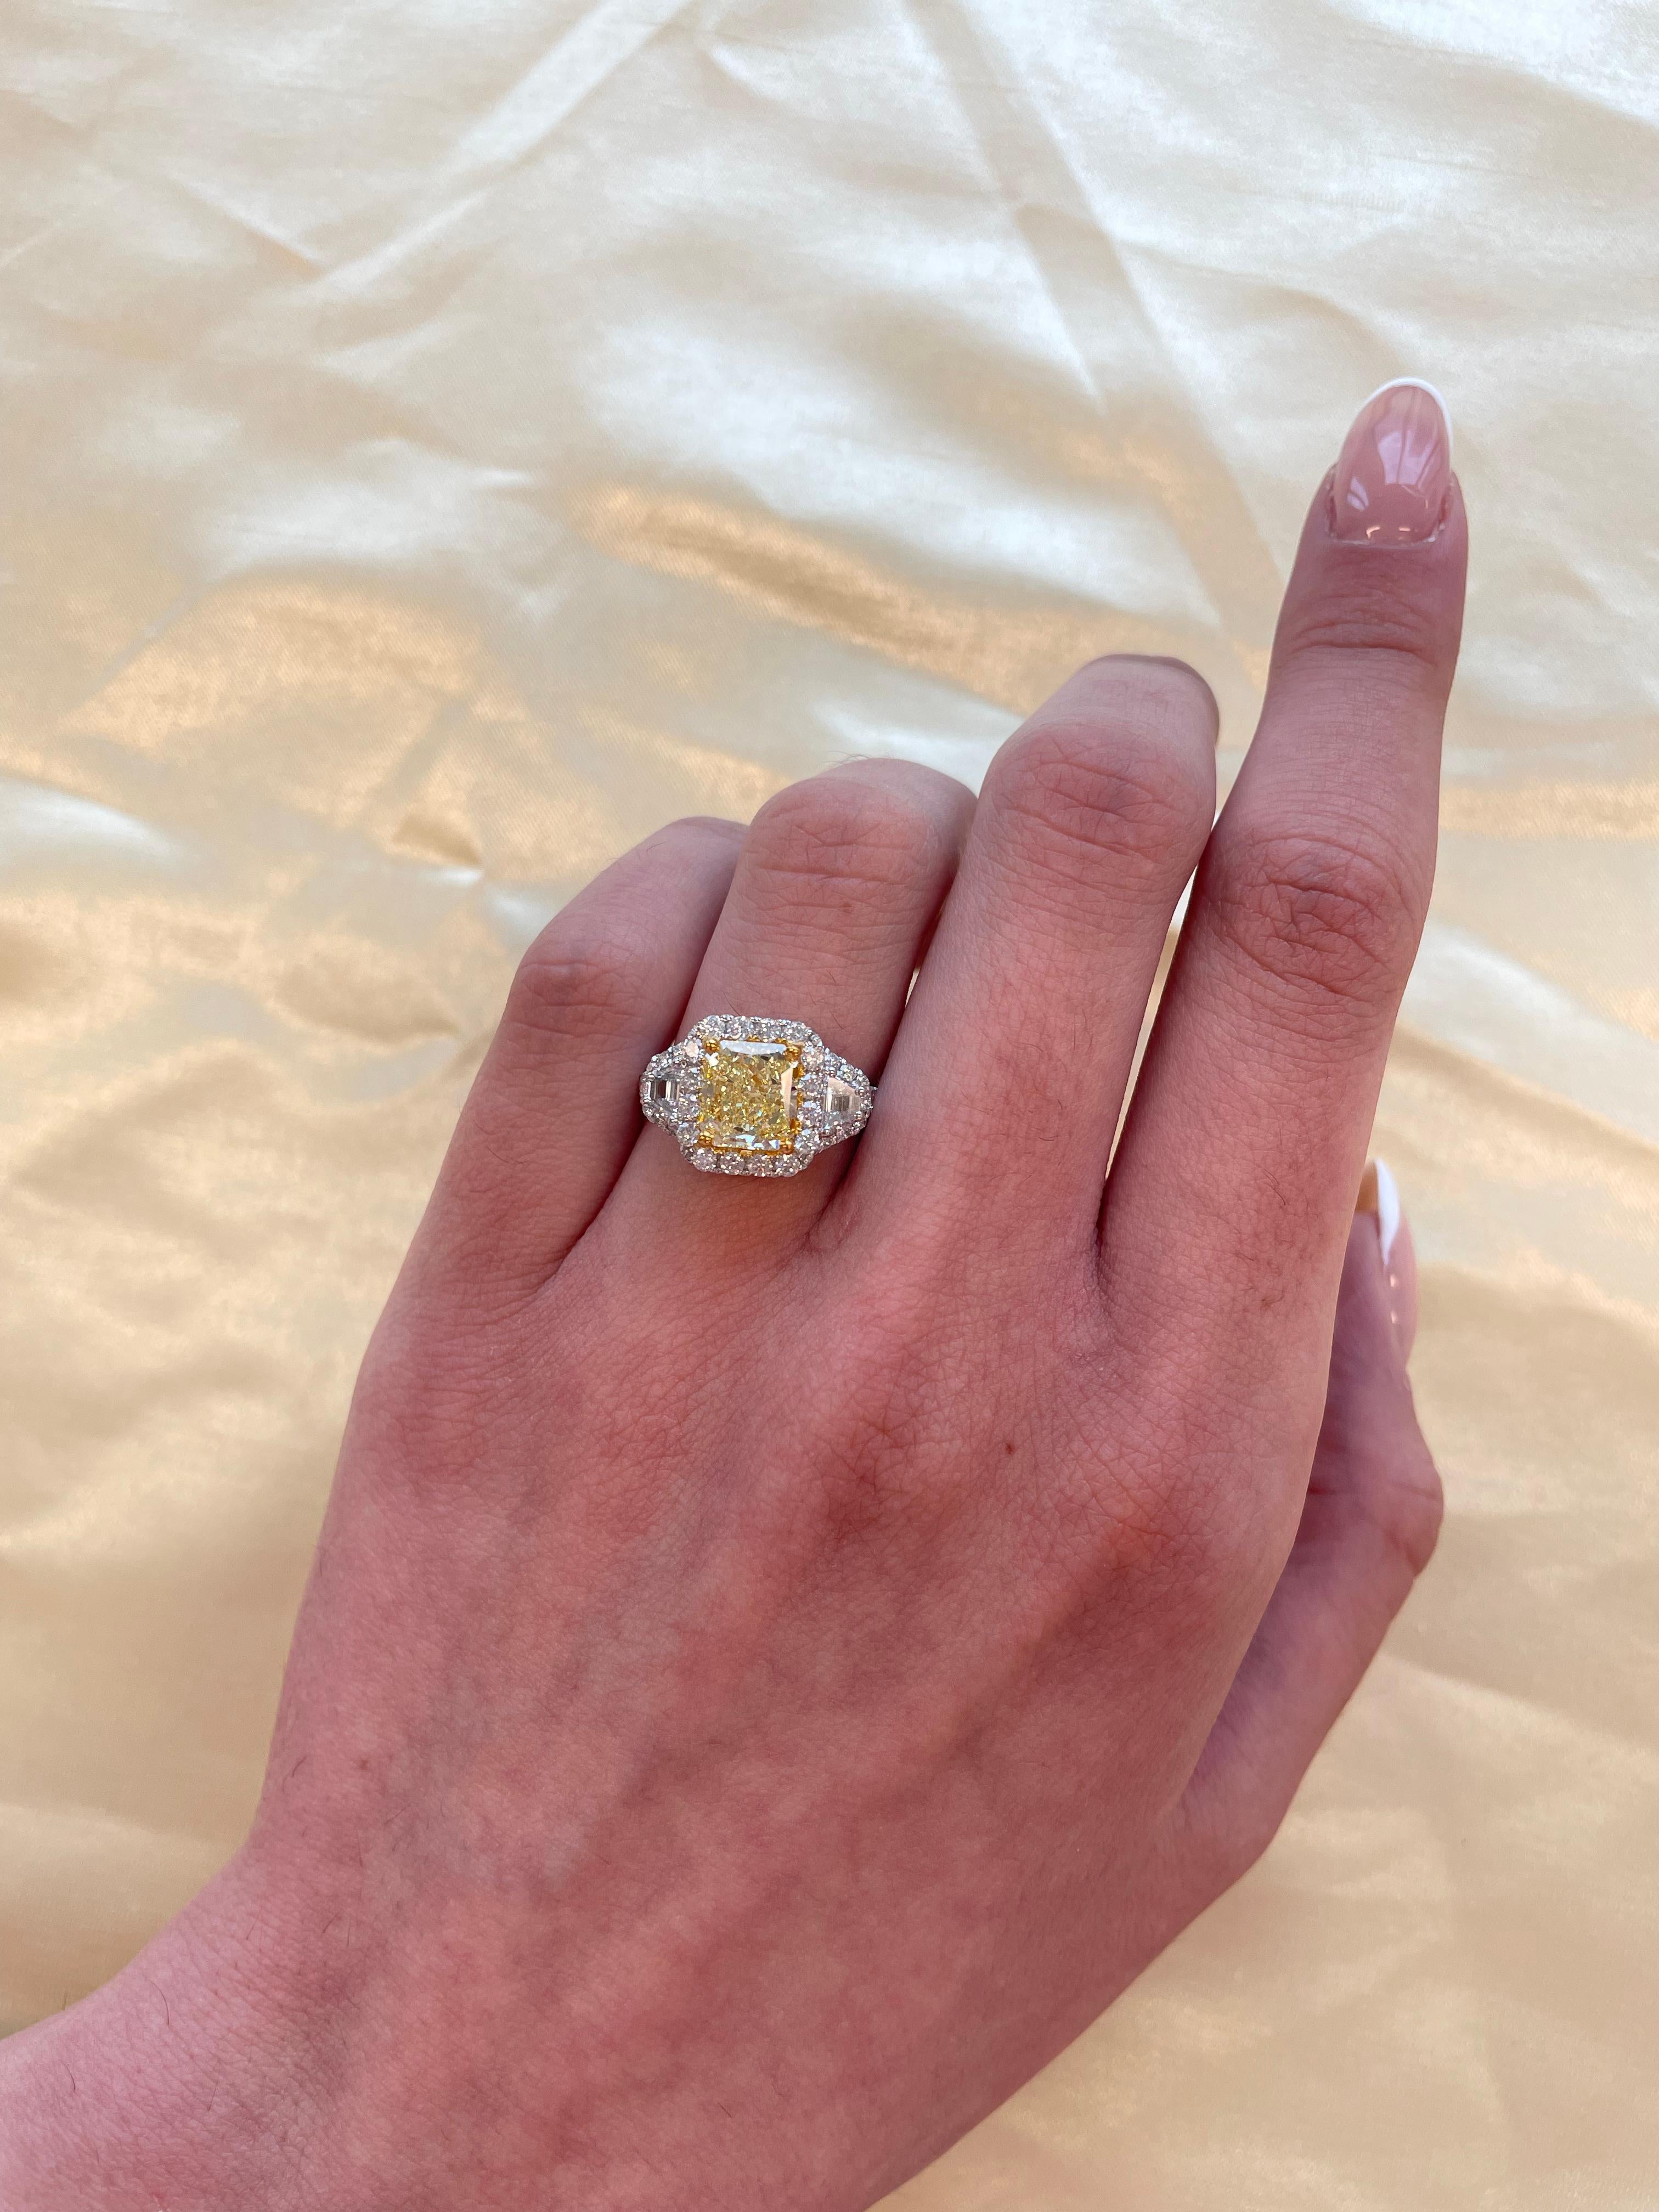 Stunning modern GIA certified fancy yellow diamond halo ring, two-tone 18k yellow and white gold. High jewelry by Alexander Beverly Hills.
*Center stone looks like a Fancy Intense Yellow diamond in the mounting
2.96 carats total diamond weight.
2.02